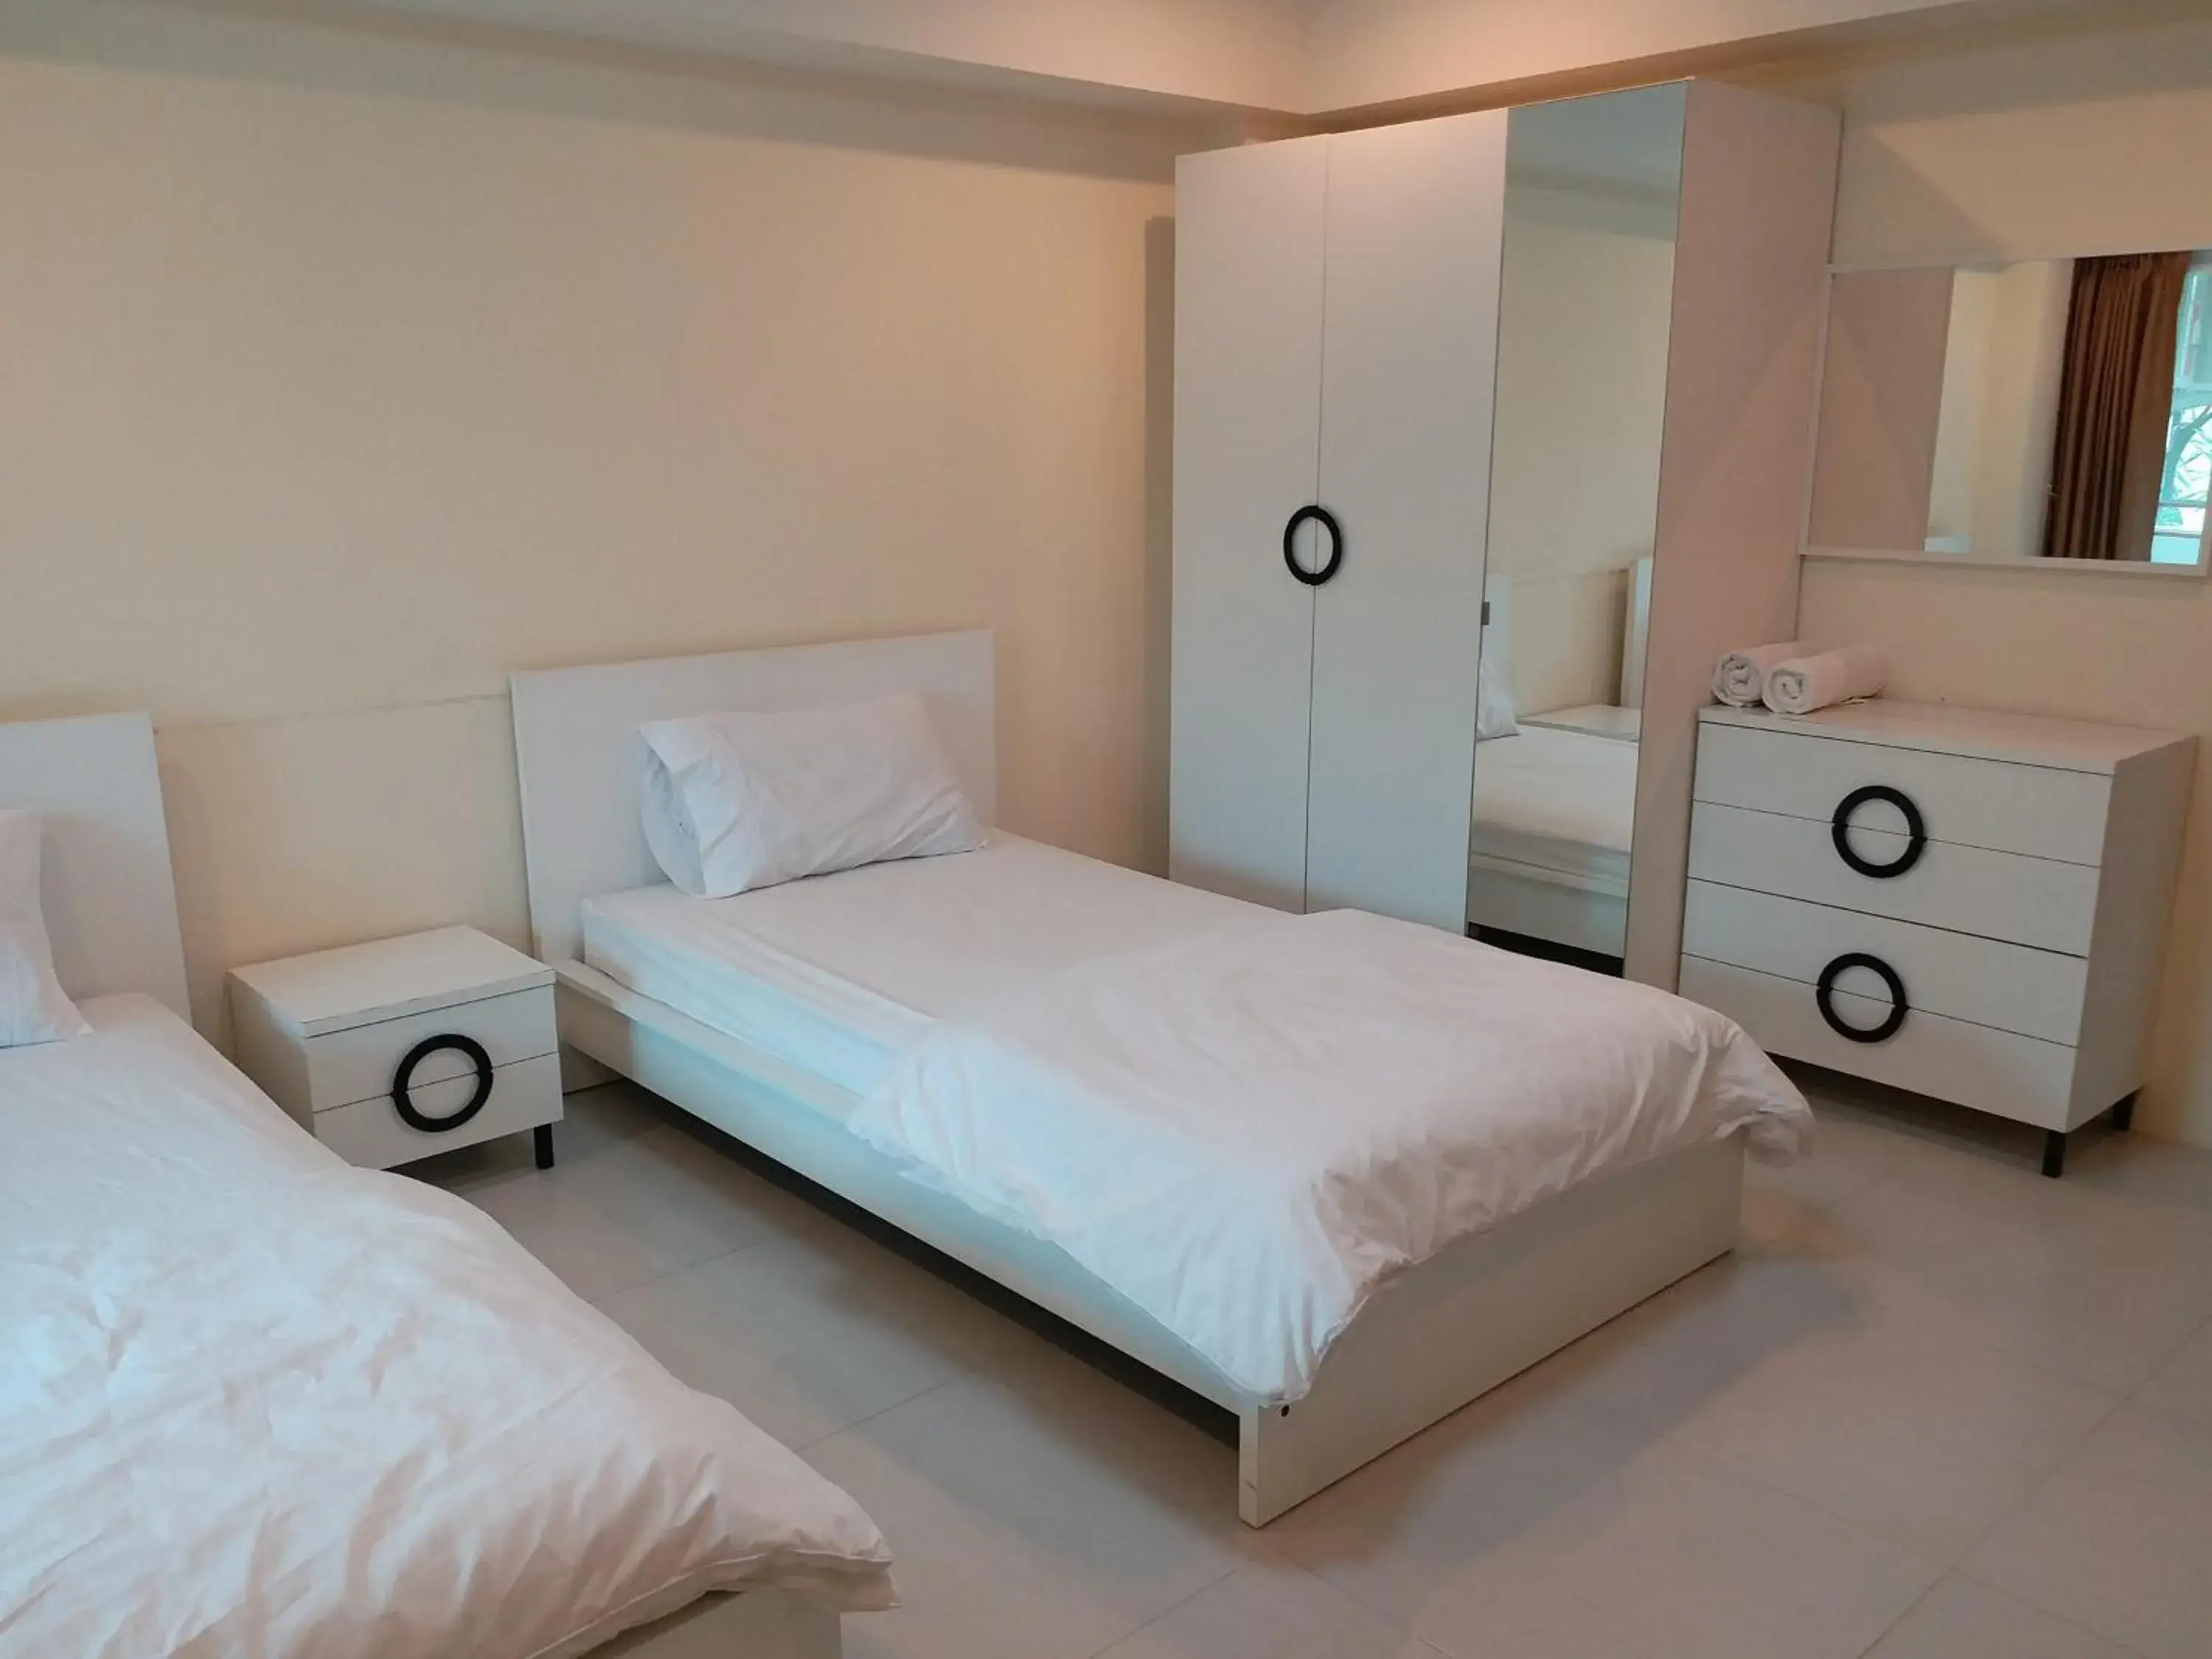 Bed, Room Photo in TongPrasit Place